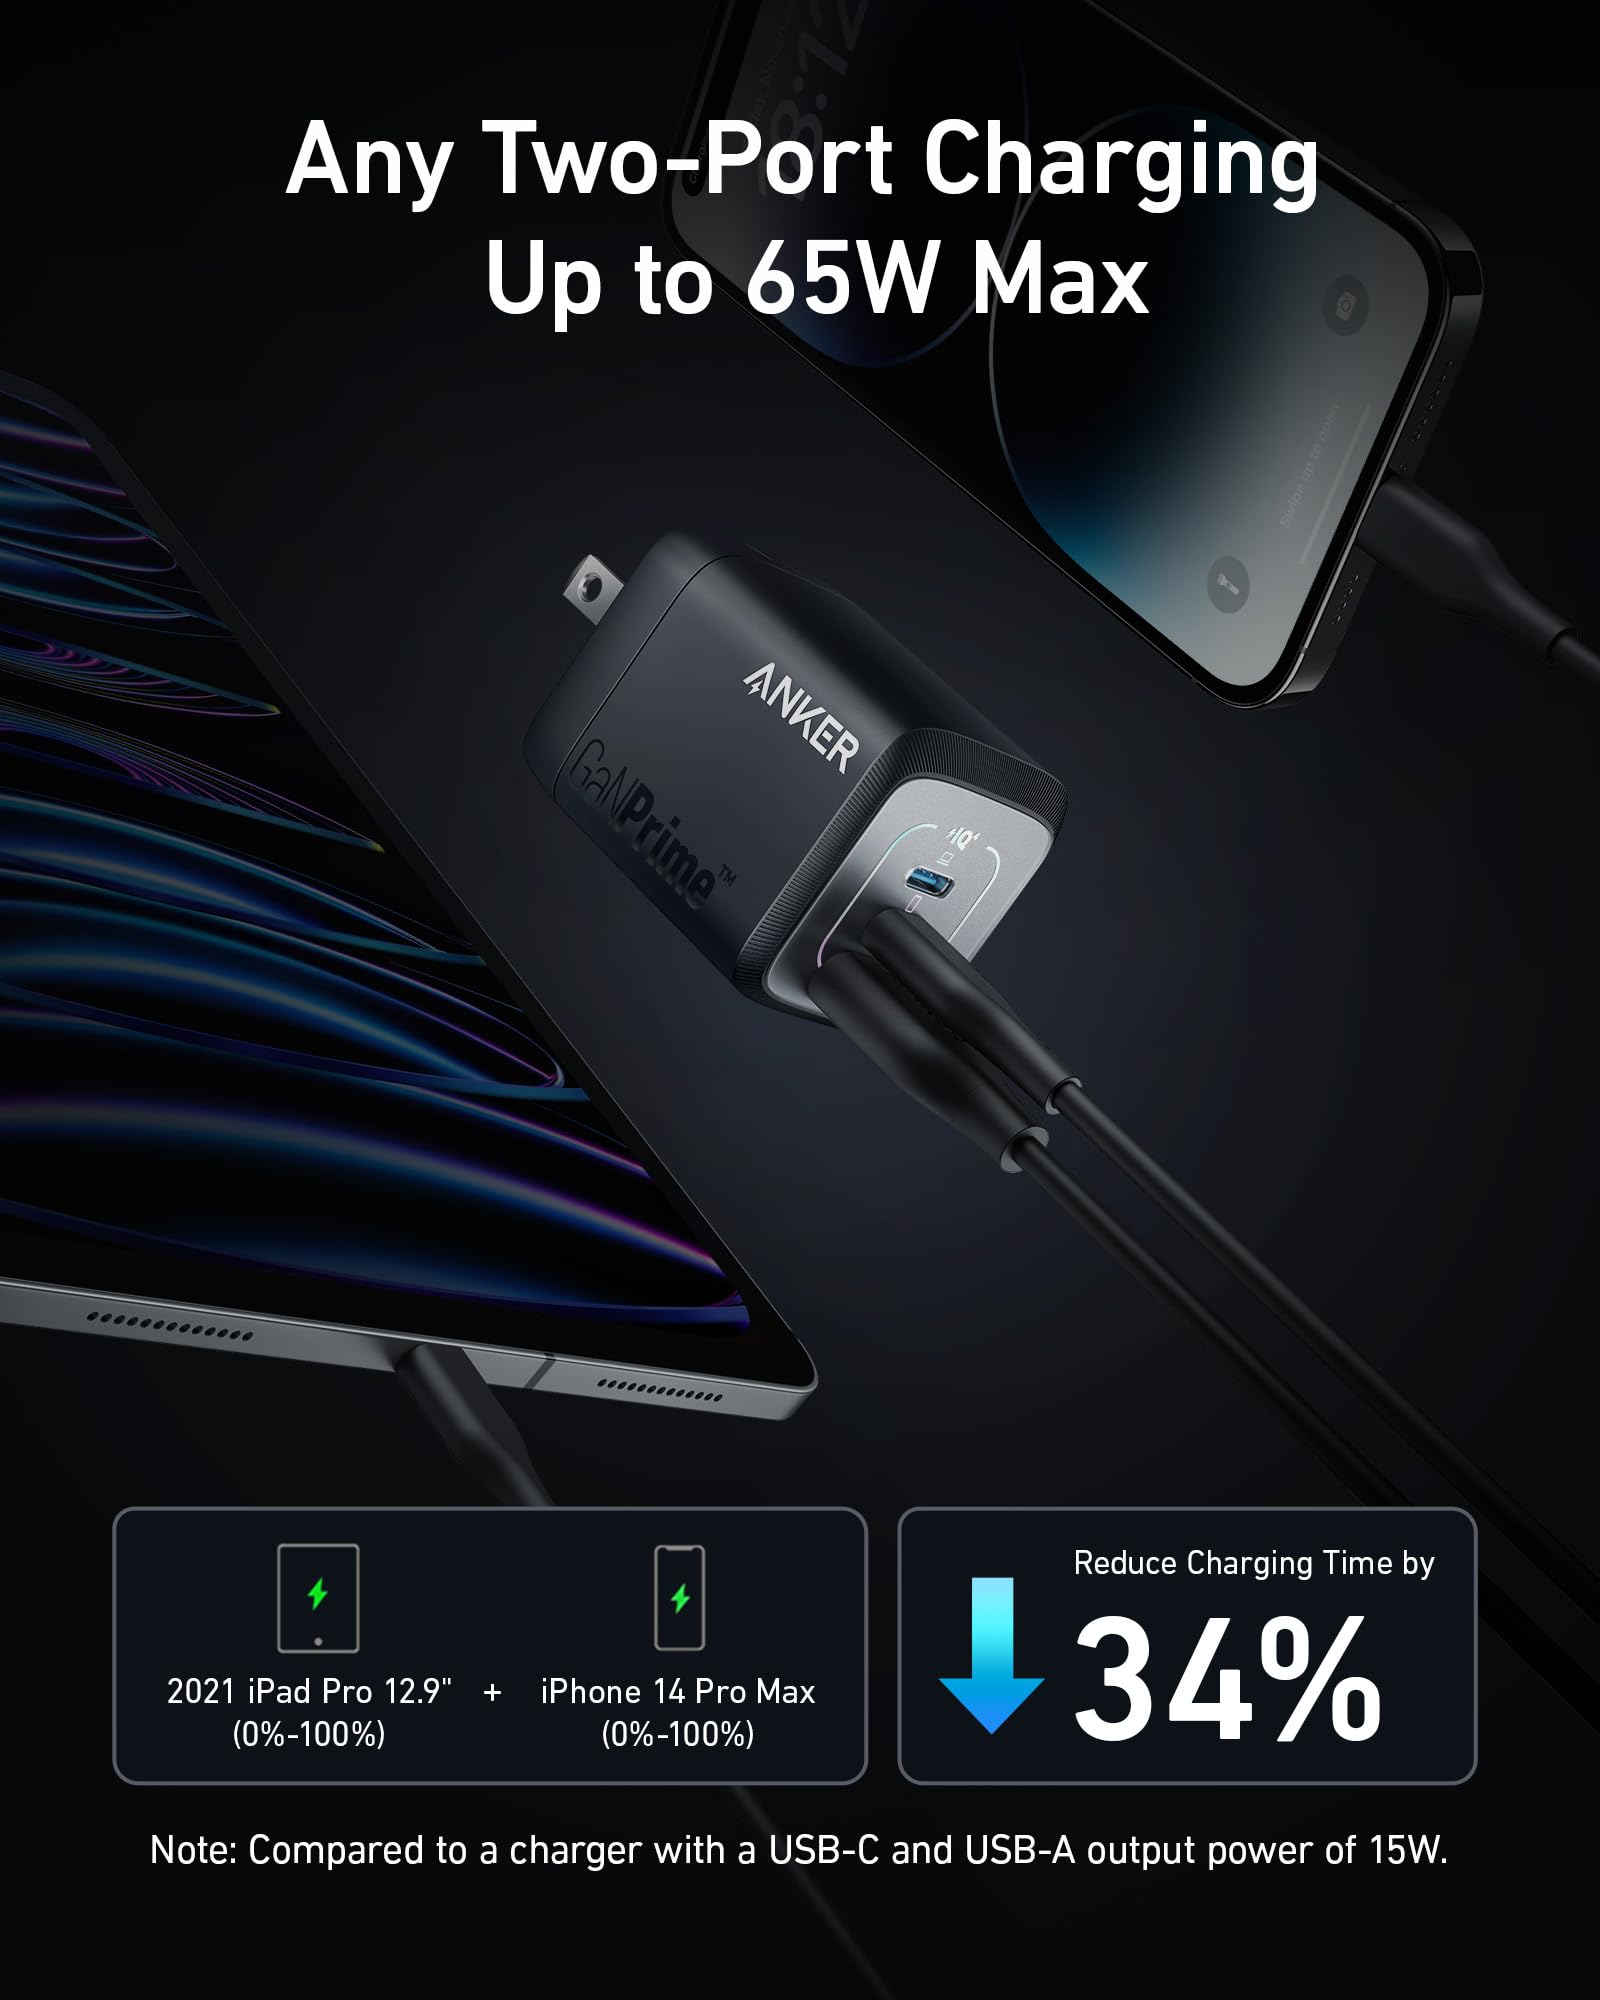 Anker 543 USB C to USB C Cable (140W, 10ft), USB 2.0 Bio-Nylon Charging Cable & Anker Prime 67W USB C Charger, GaN Wall Charger, 3-Port Compact Fast Charger